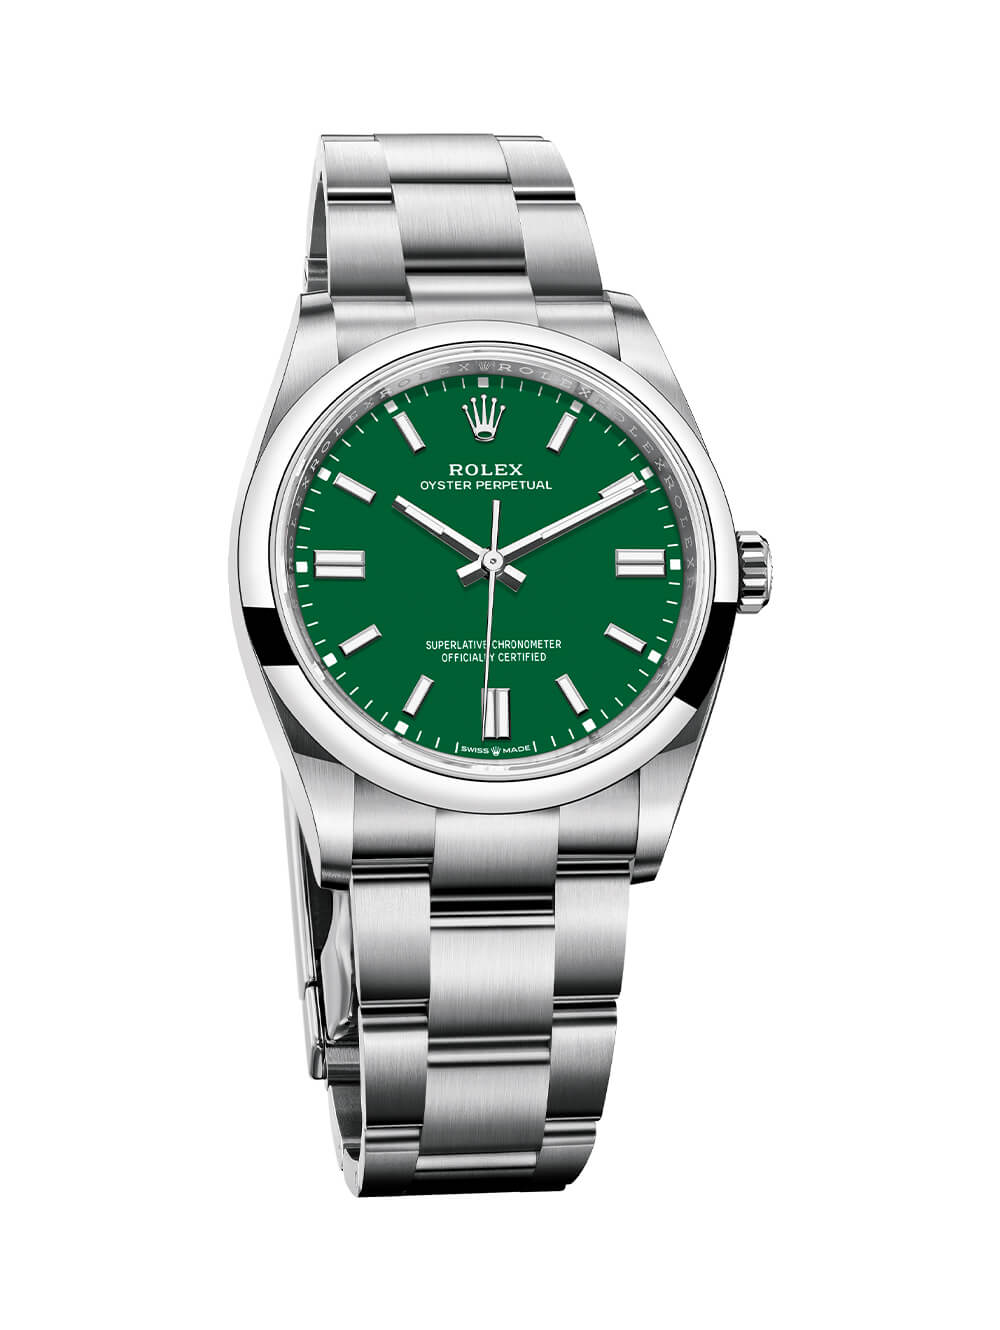 Rolex Oyster Perpetual 36 Ref 126000 Racing Green Dial